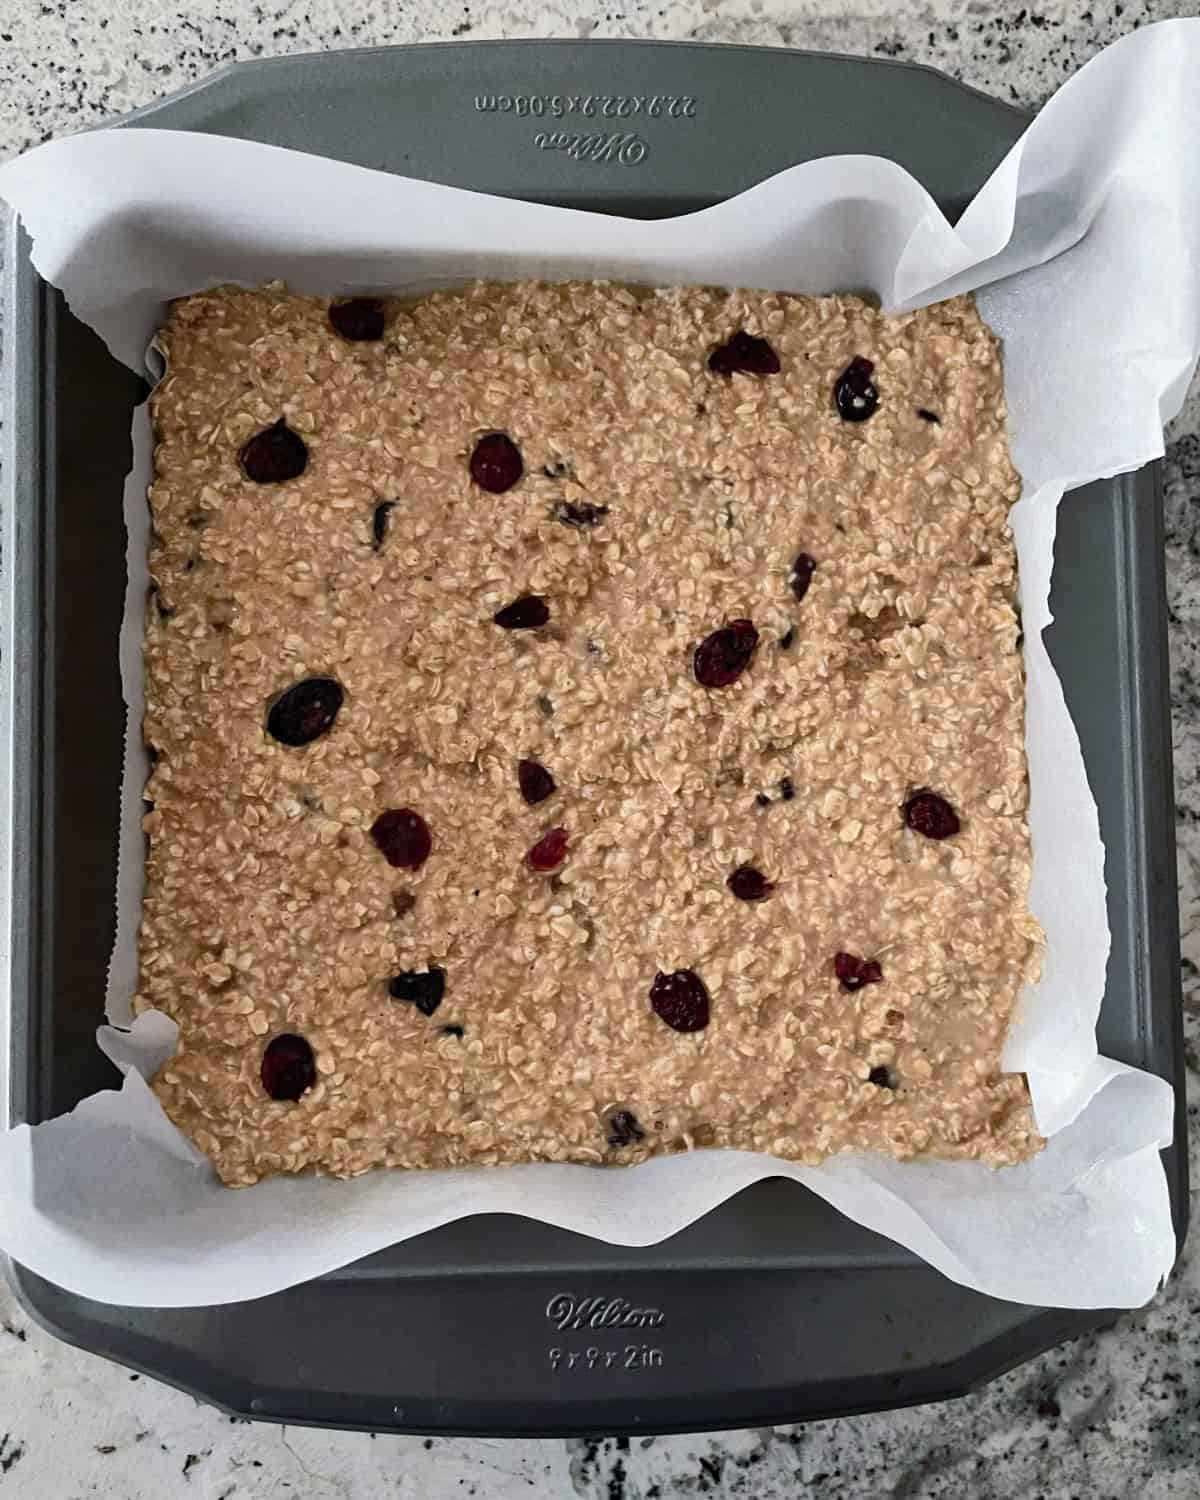 Unbaked cranberry ginger oatmeal bars in parchment lined baking pan.